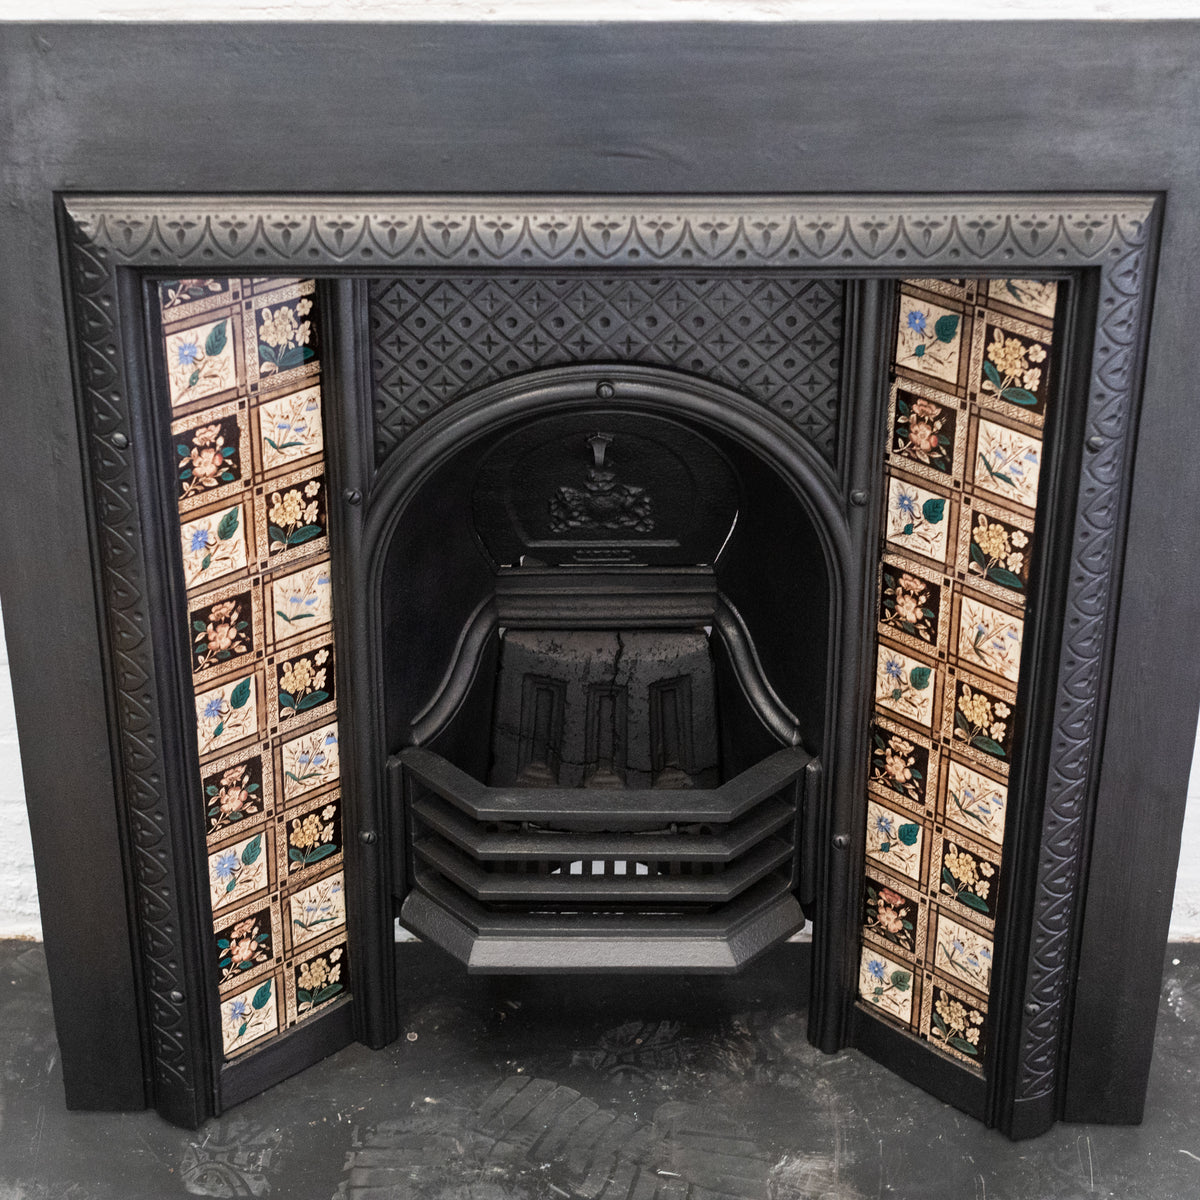 Antique Cast Iron Fireplace Insert with Original Tiles | The Architectural Forum